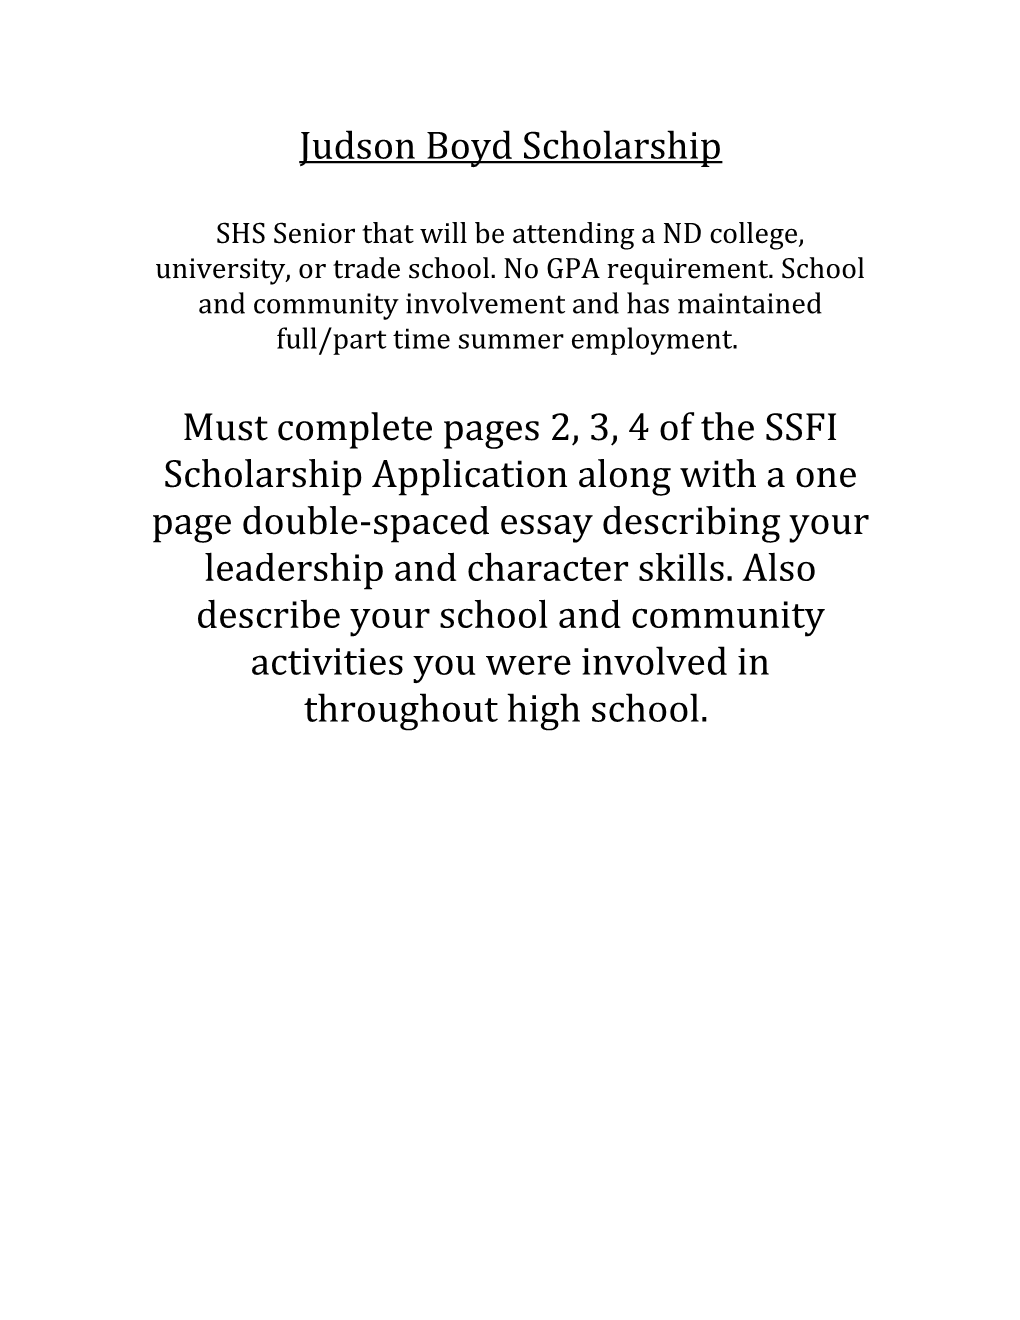 Stanley Scholarship Funds, Inc